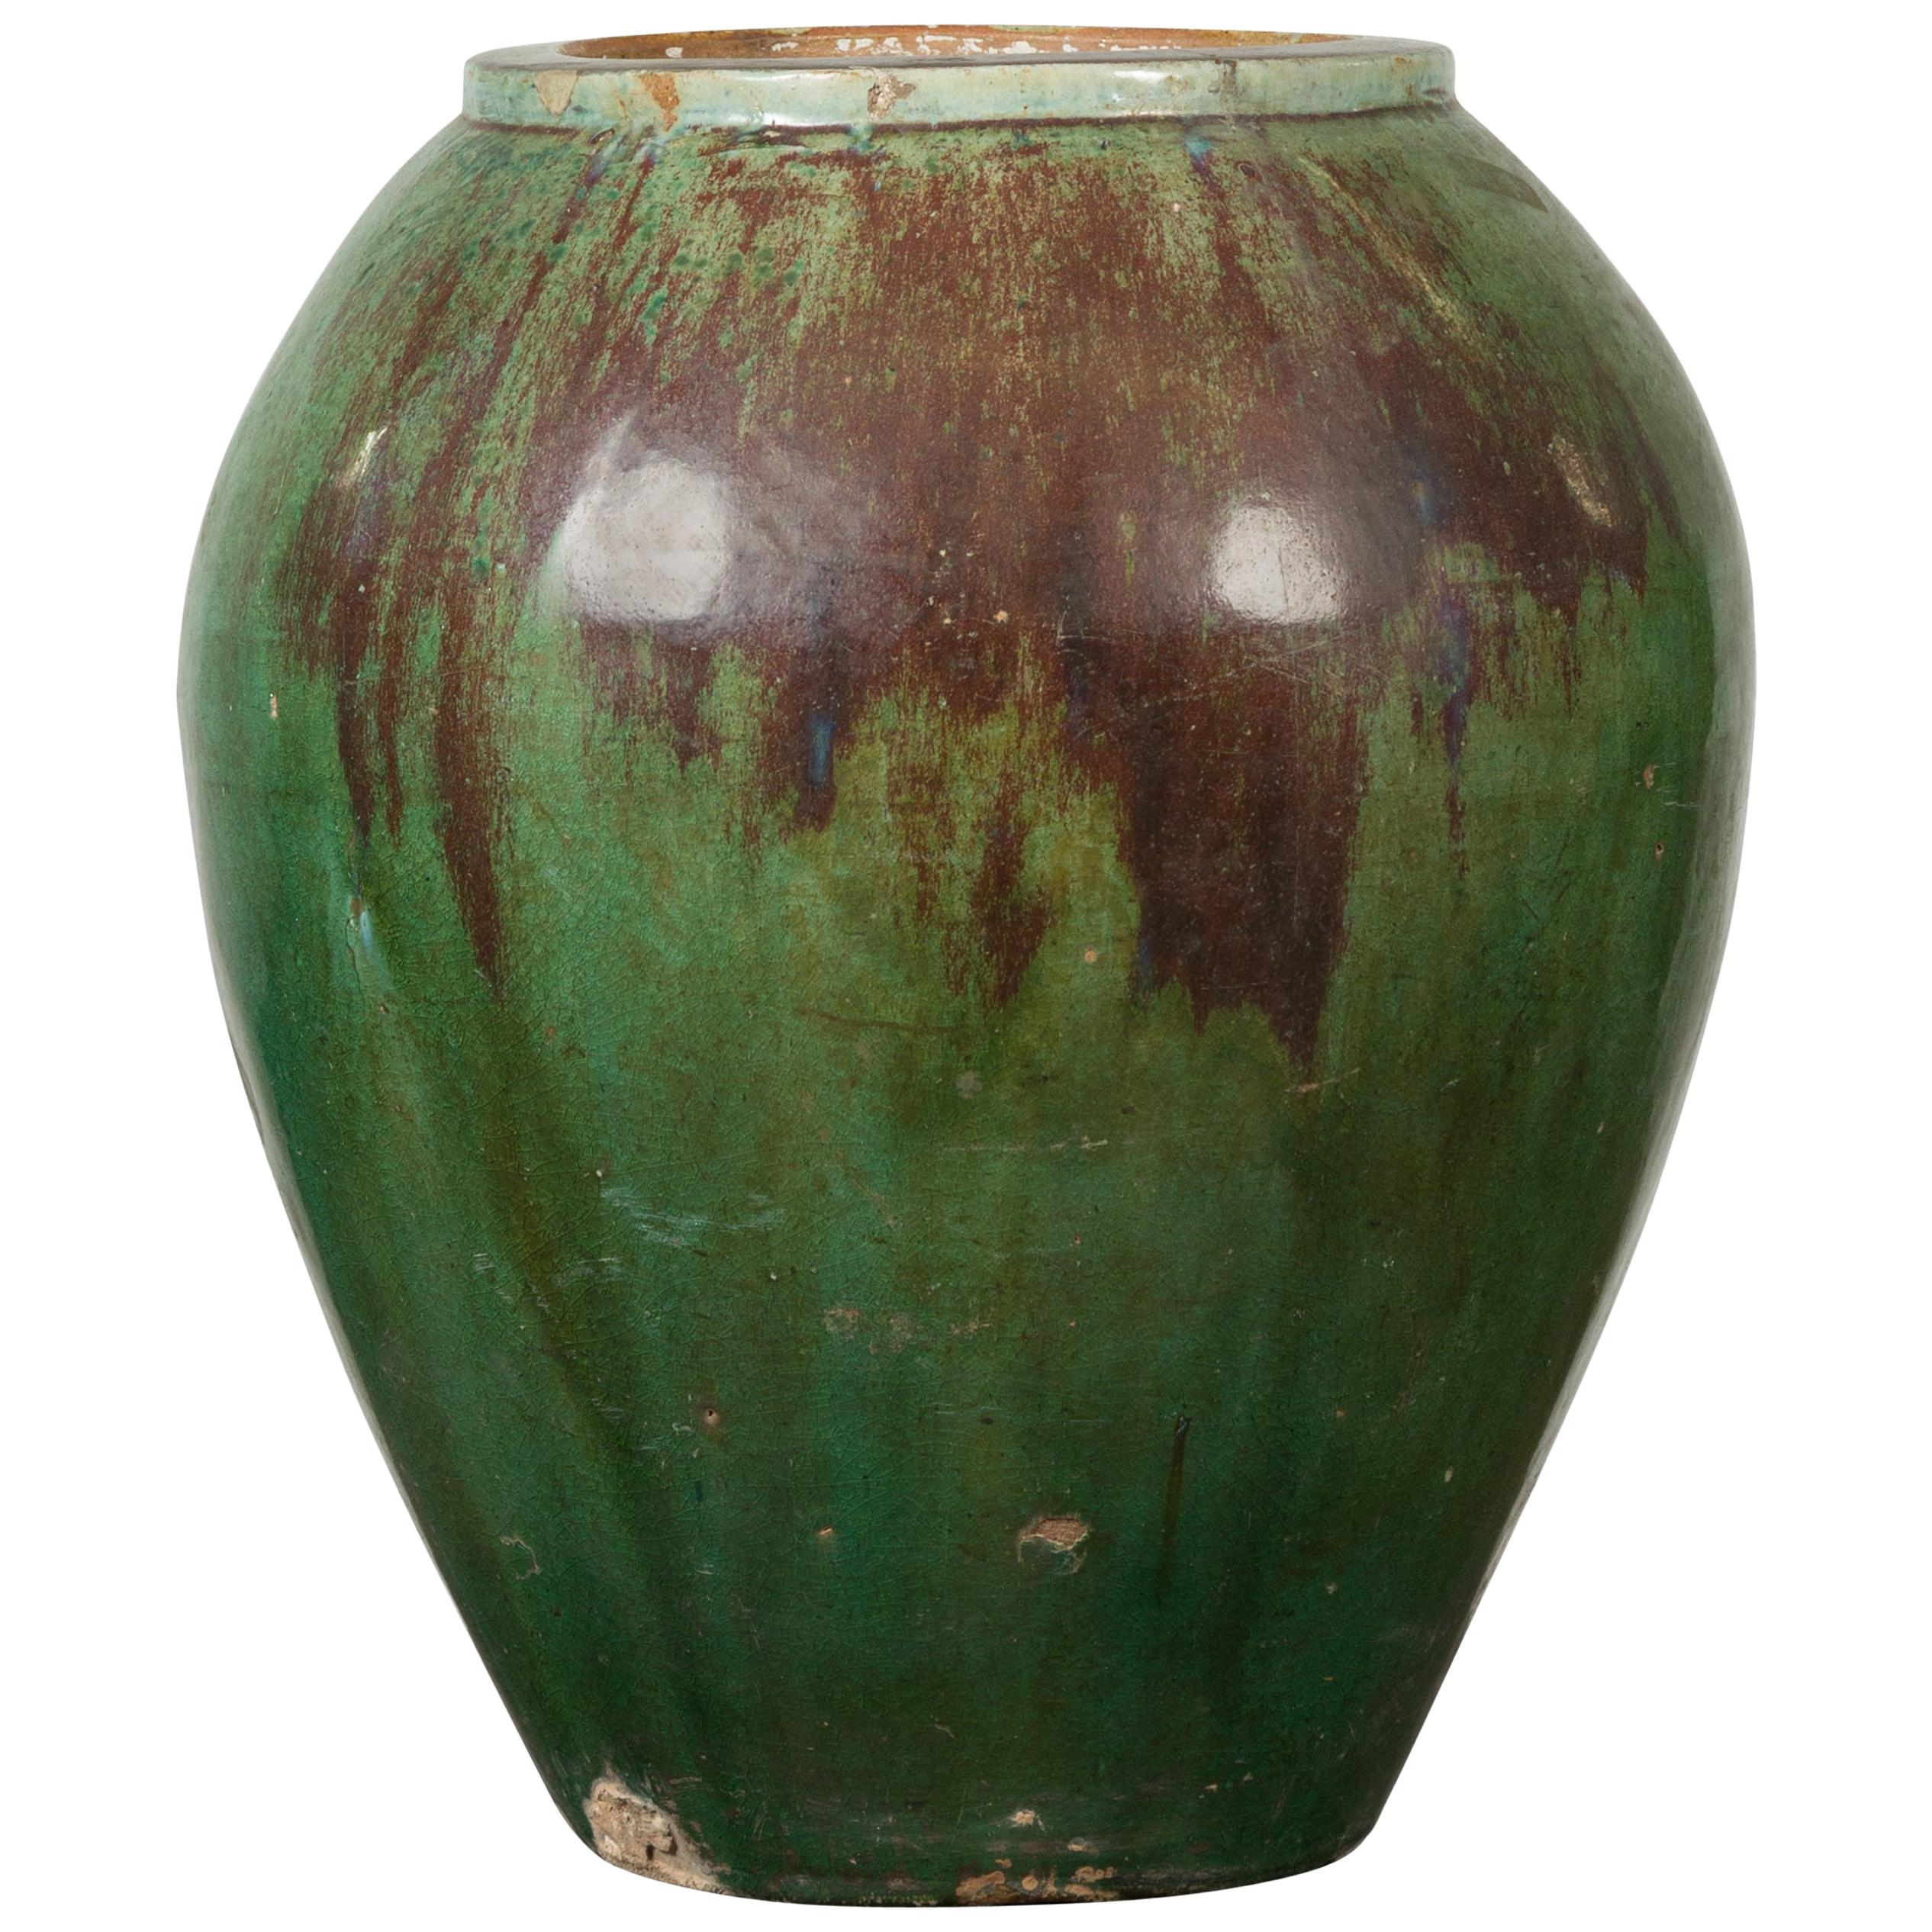 Antique Thai Garden Vase with Distressed Verde Patina and Brown Drip Glaze  For Sale at 1stDibs